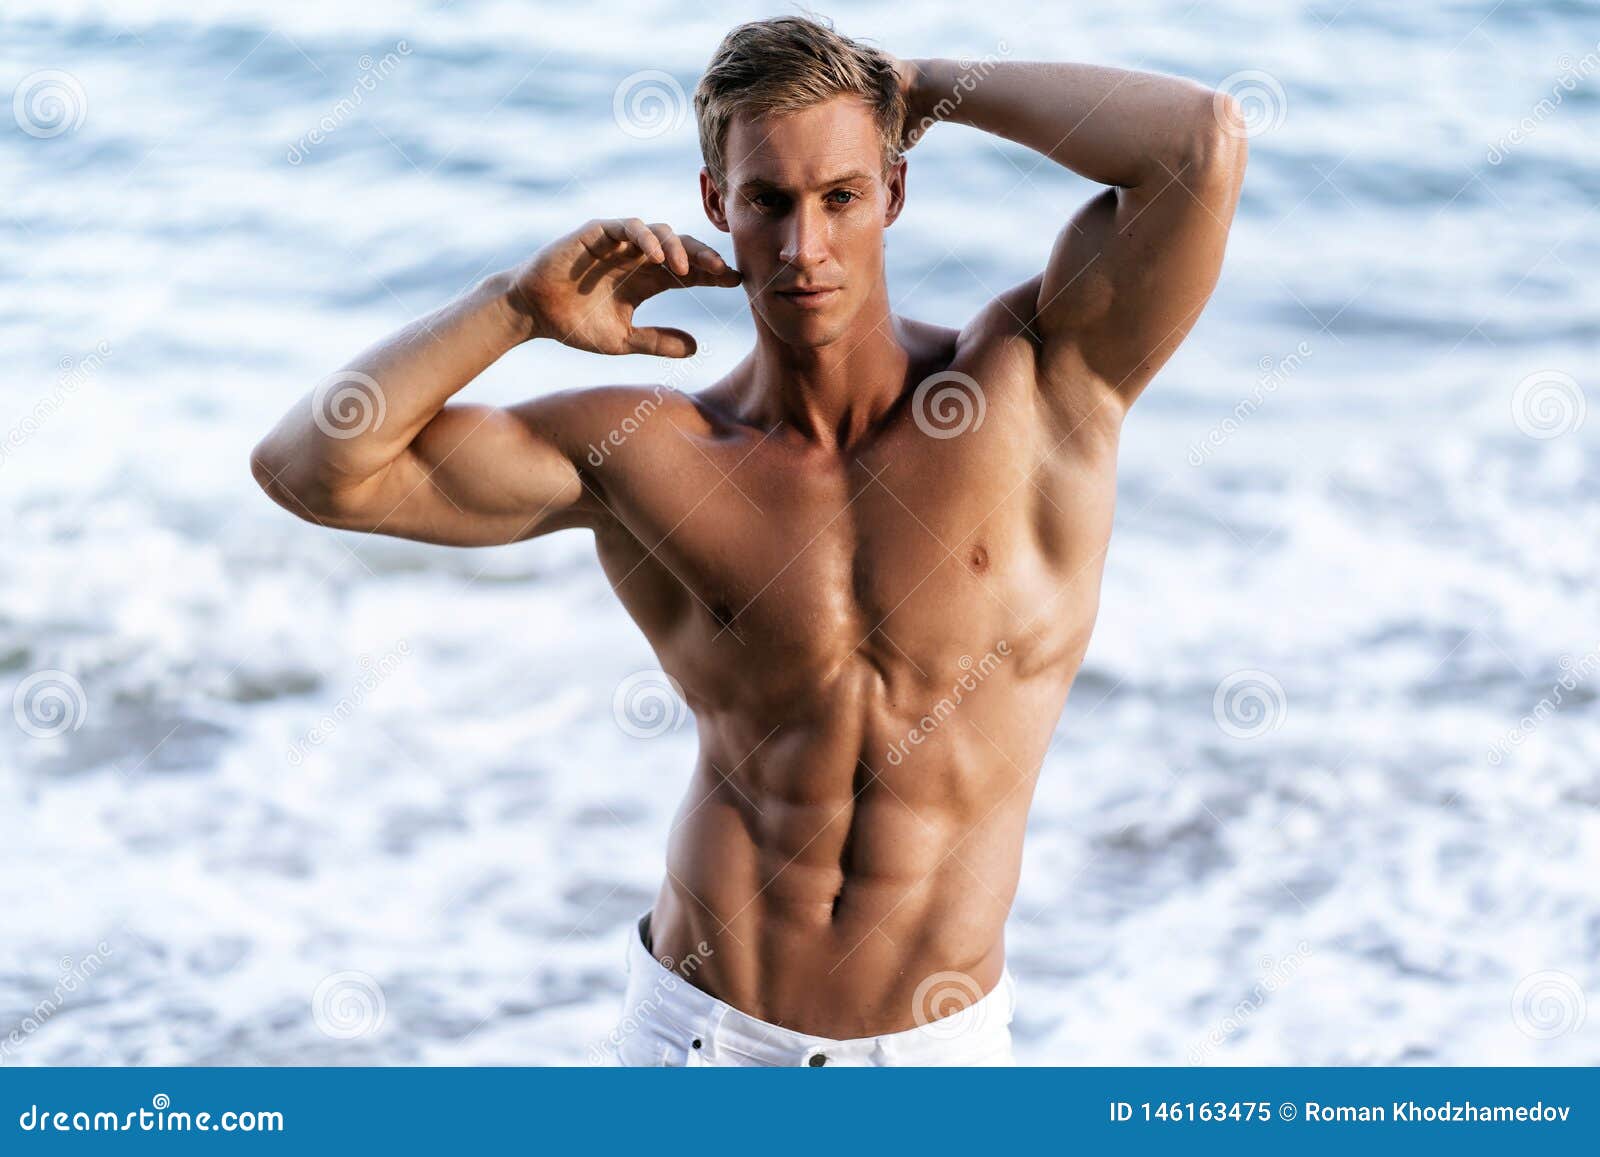 Beach Fitness Models Naked - Beautiful Man With Naked Muscular Torso At White Sand Beach ...